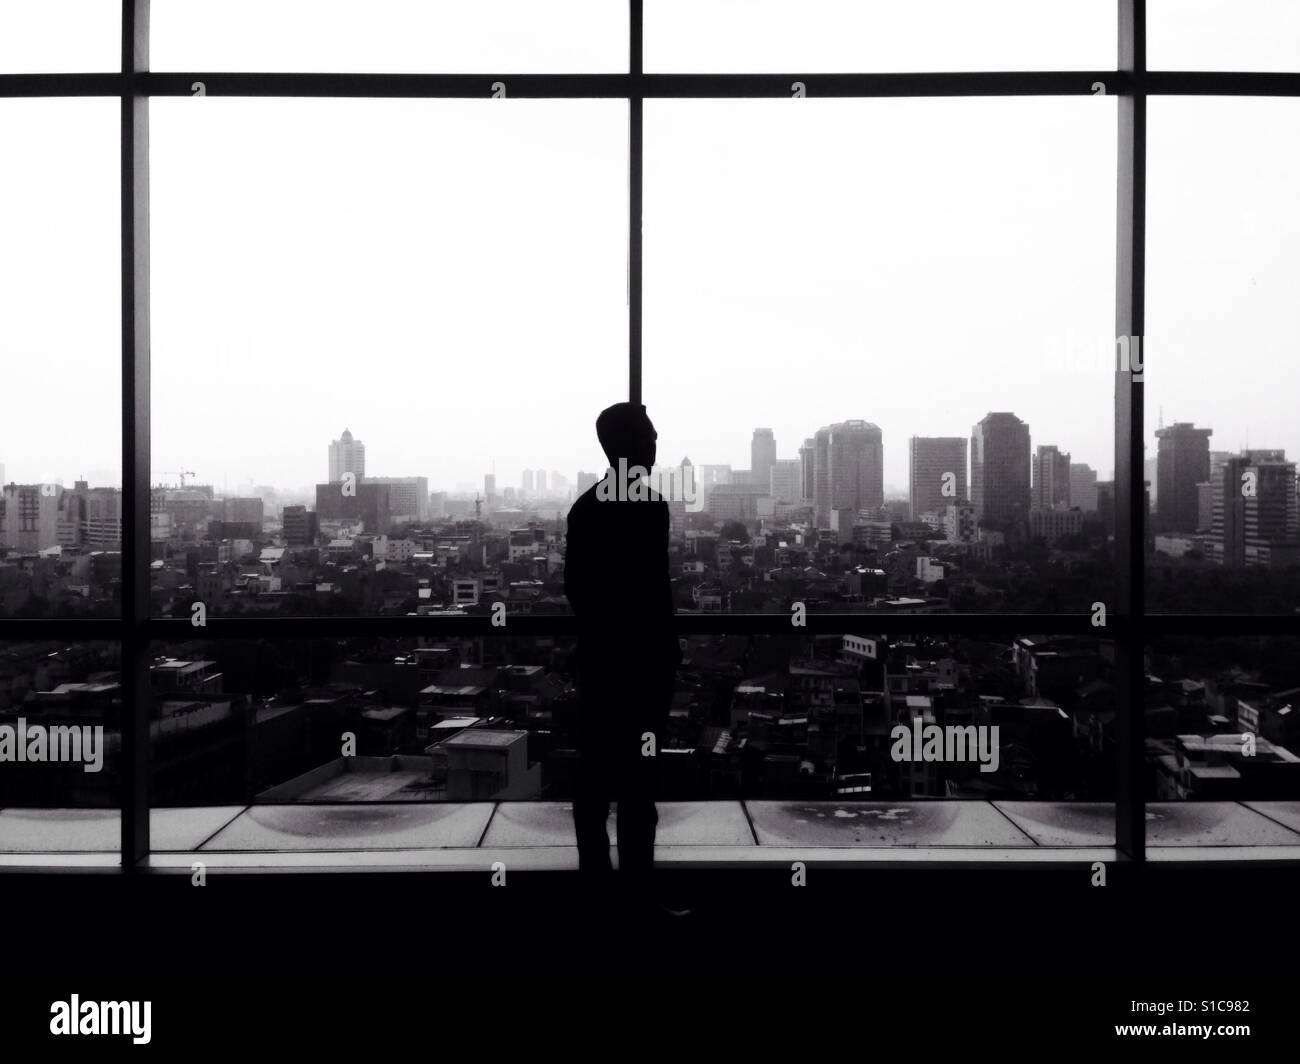 Silhouette of Man Looking Out The Window to See Cityscape Landscape - Black and White Stock Photo